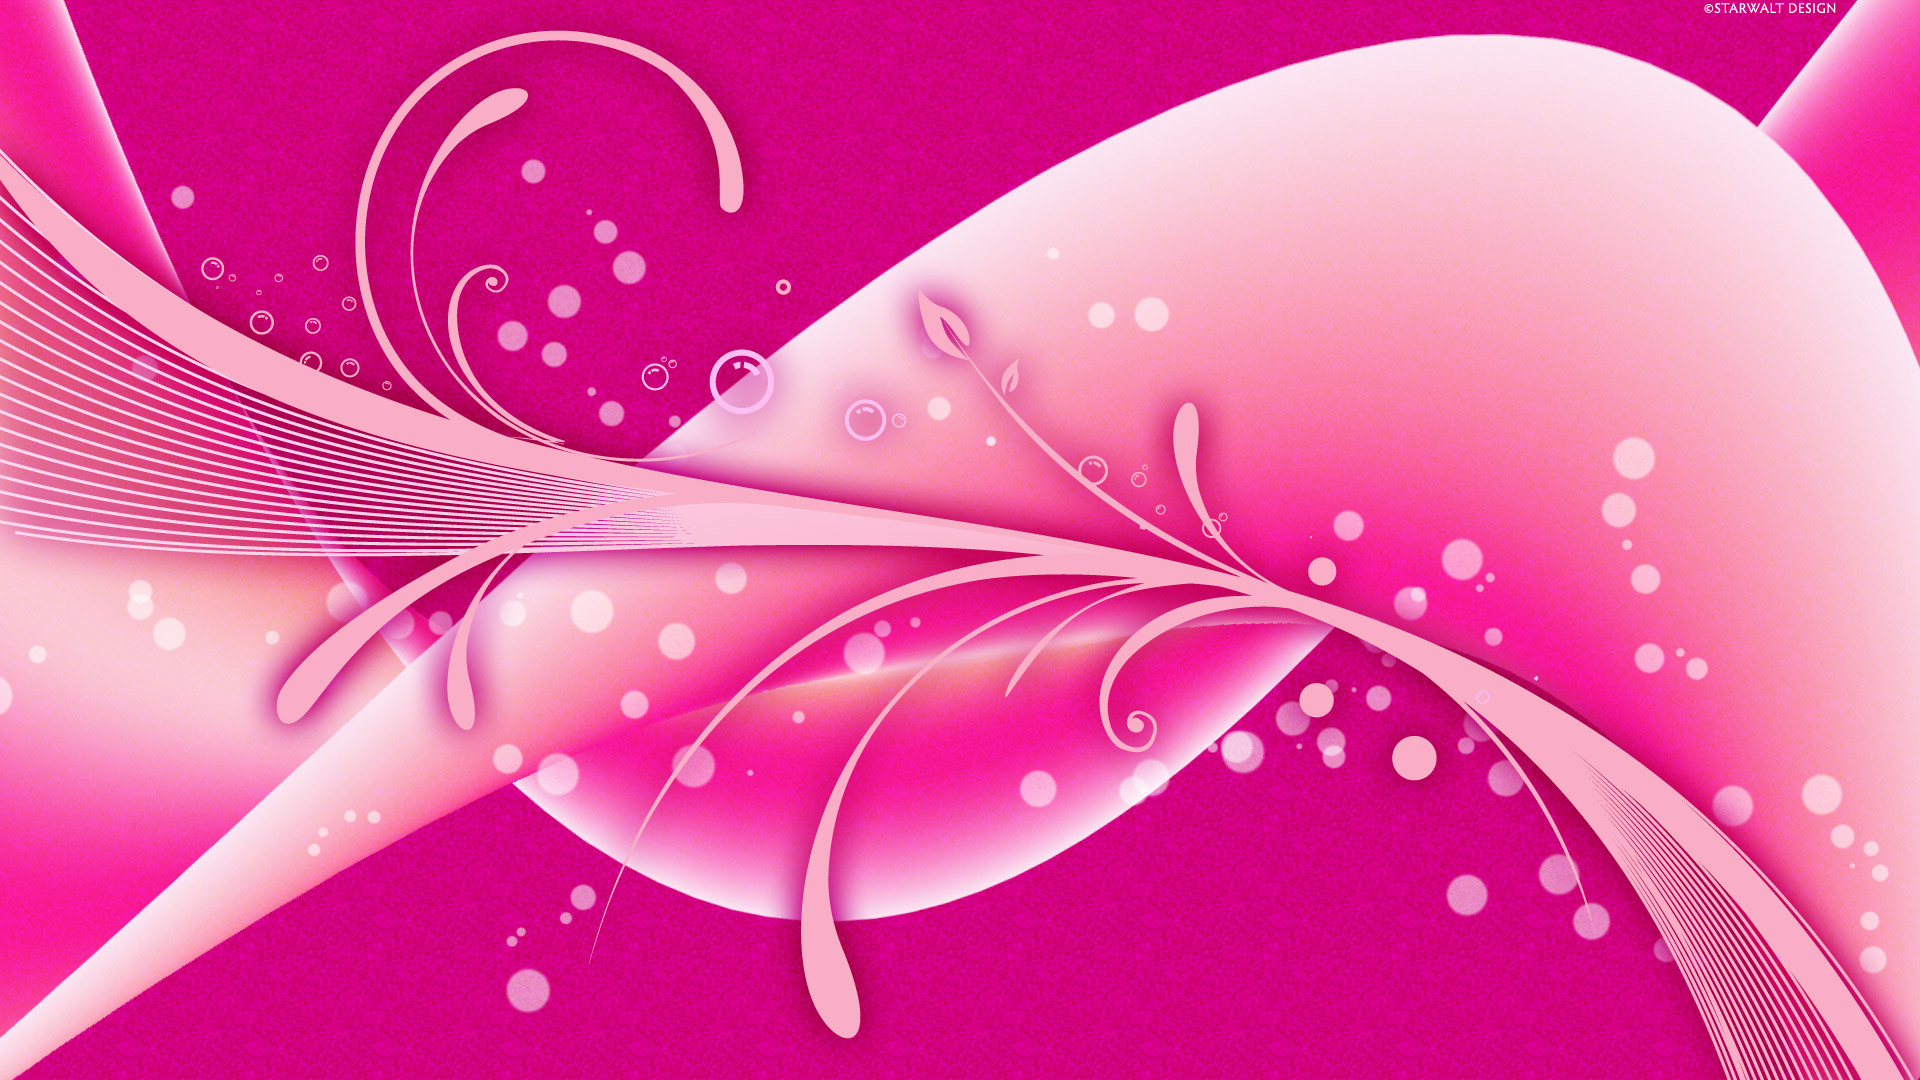 1920x1080 Pink And Black Wallpaper Designs 5 High Resolution Wallpaper. Pink And  Black Wallpaper Designs 5 High Resolution Wallpaper